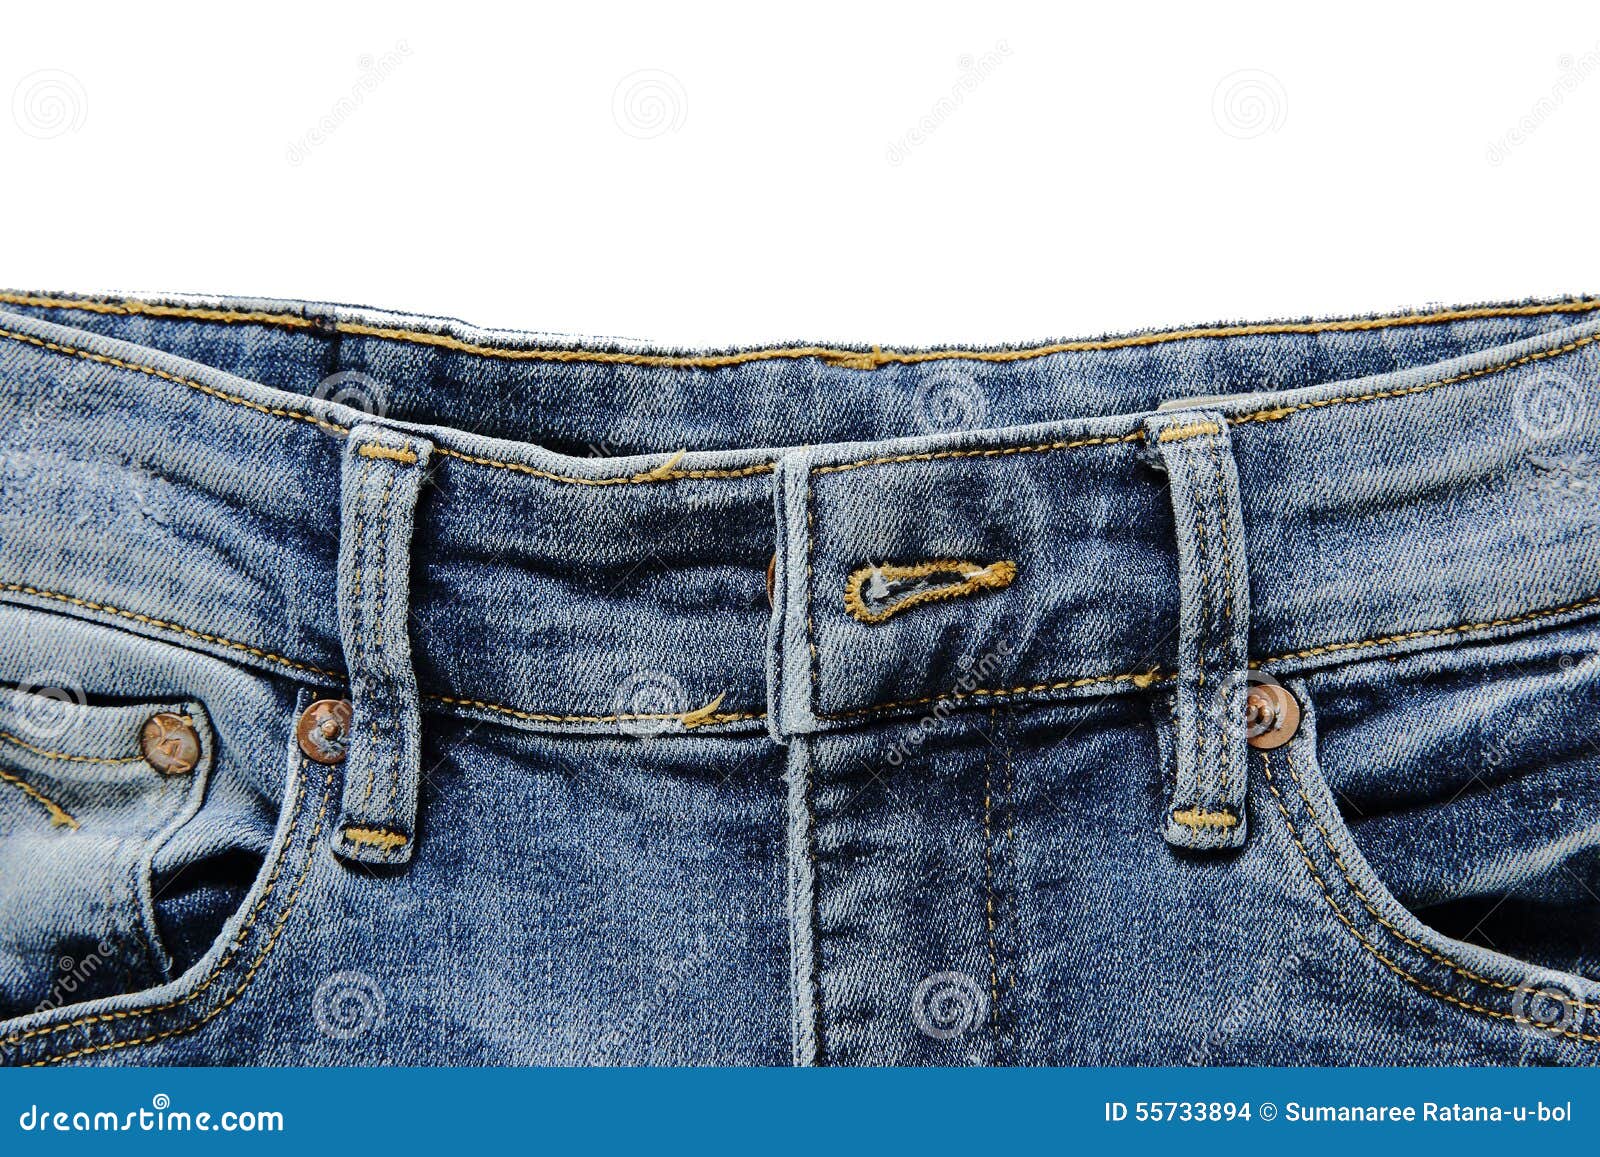 Blue Jeans on White Background Stock Photo - Image of clothing, details ...